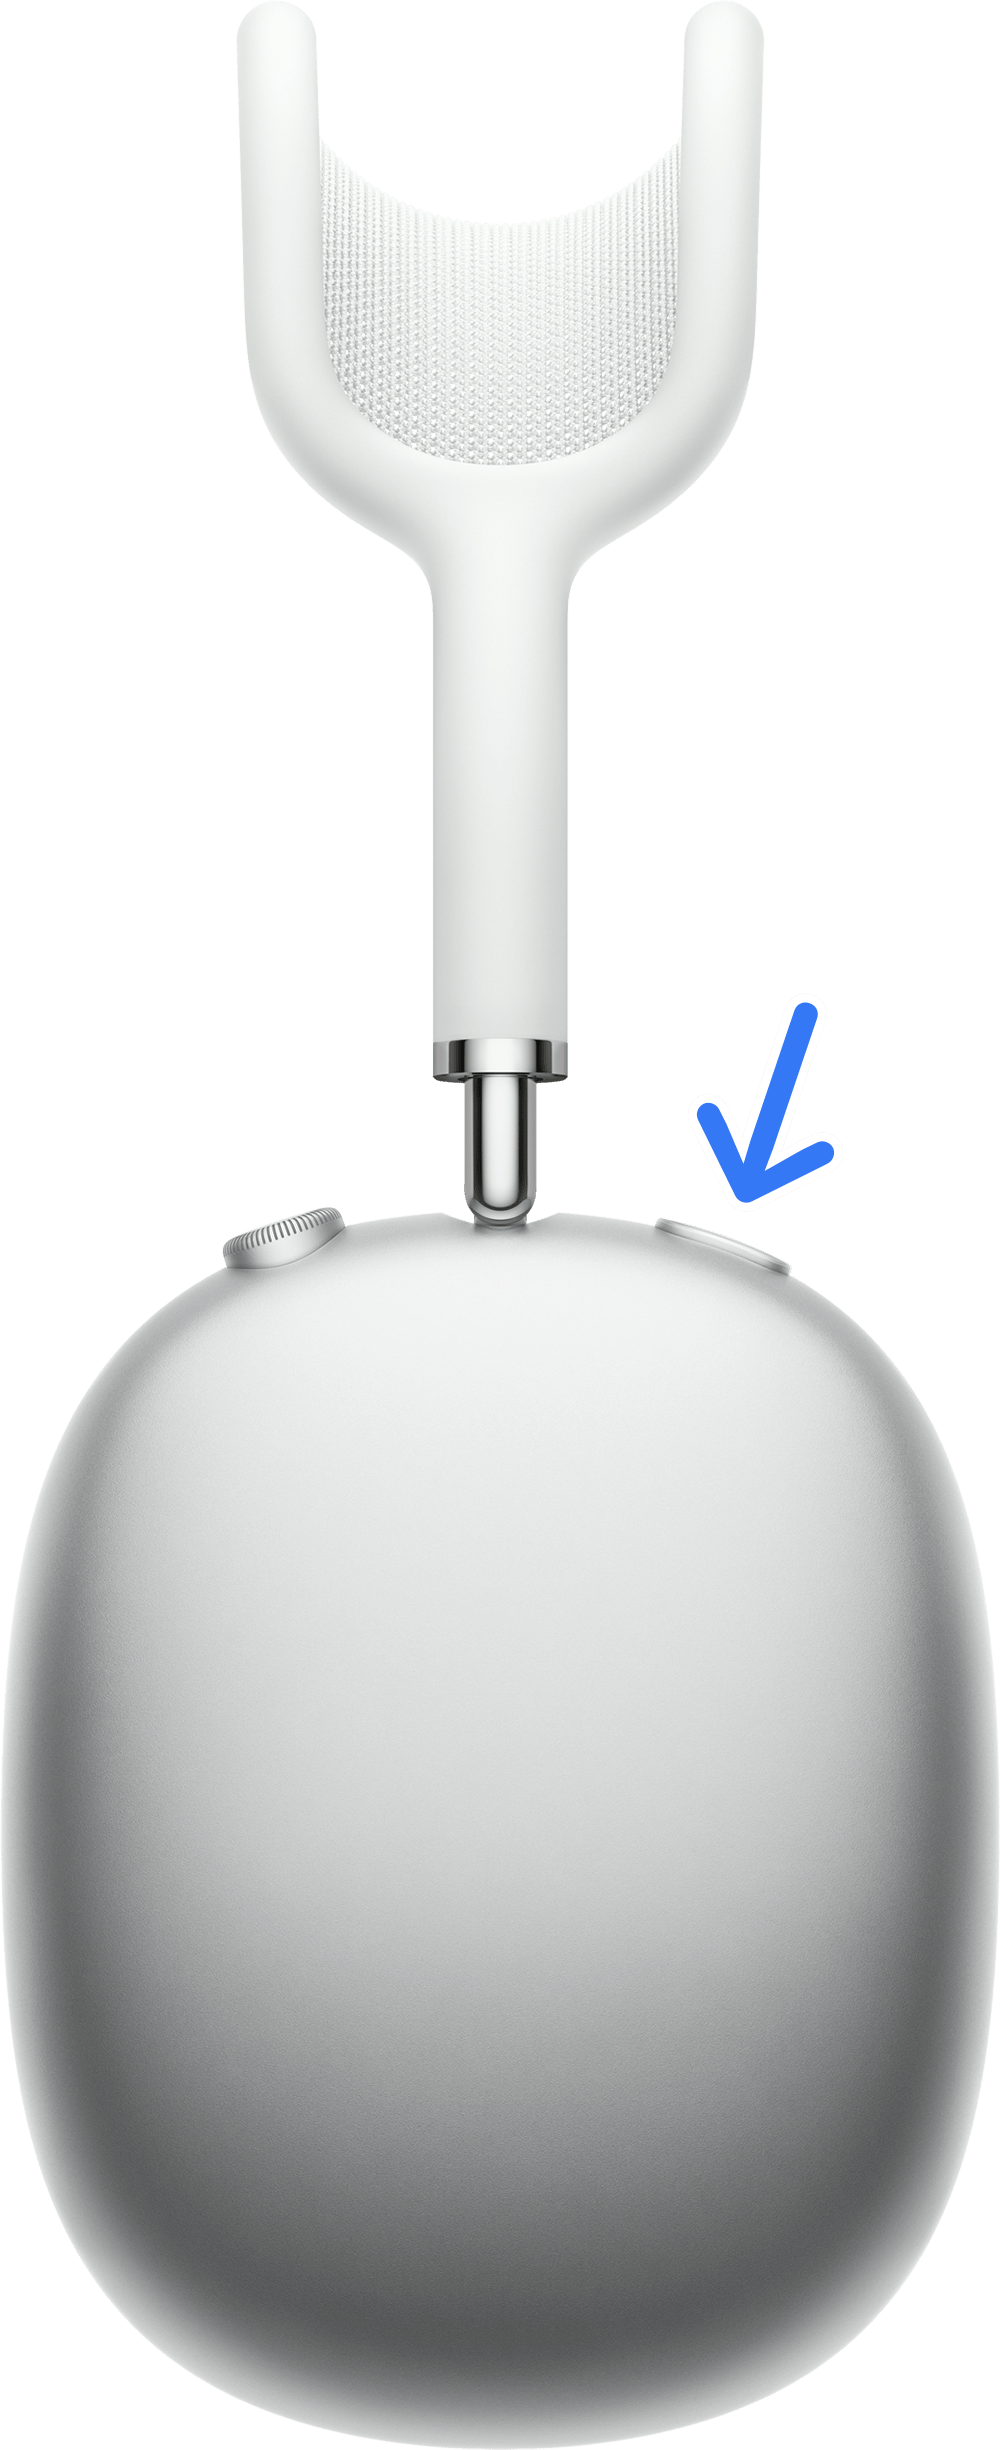 airpods-max-noise-mode-sound-mode-button-right-side